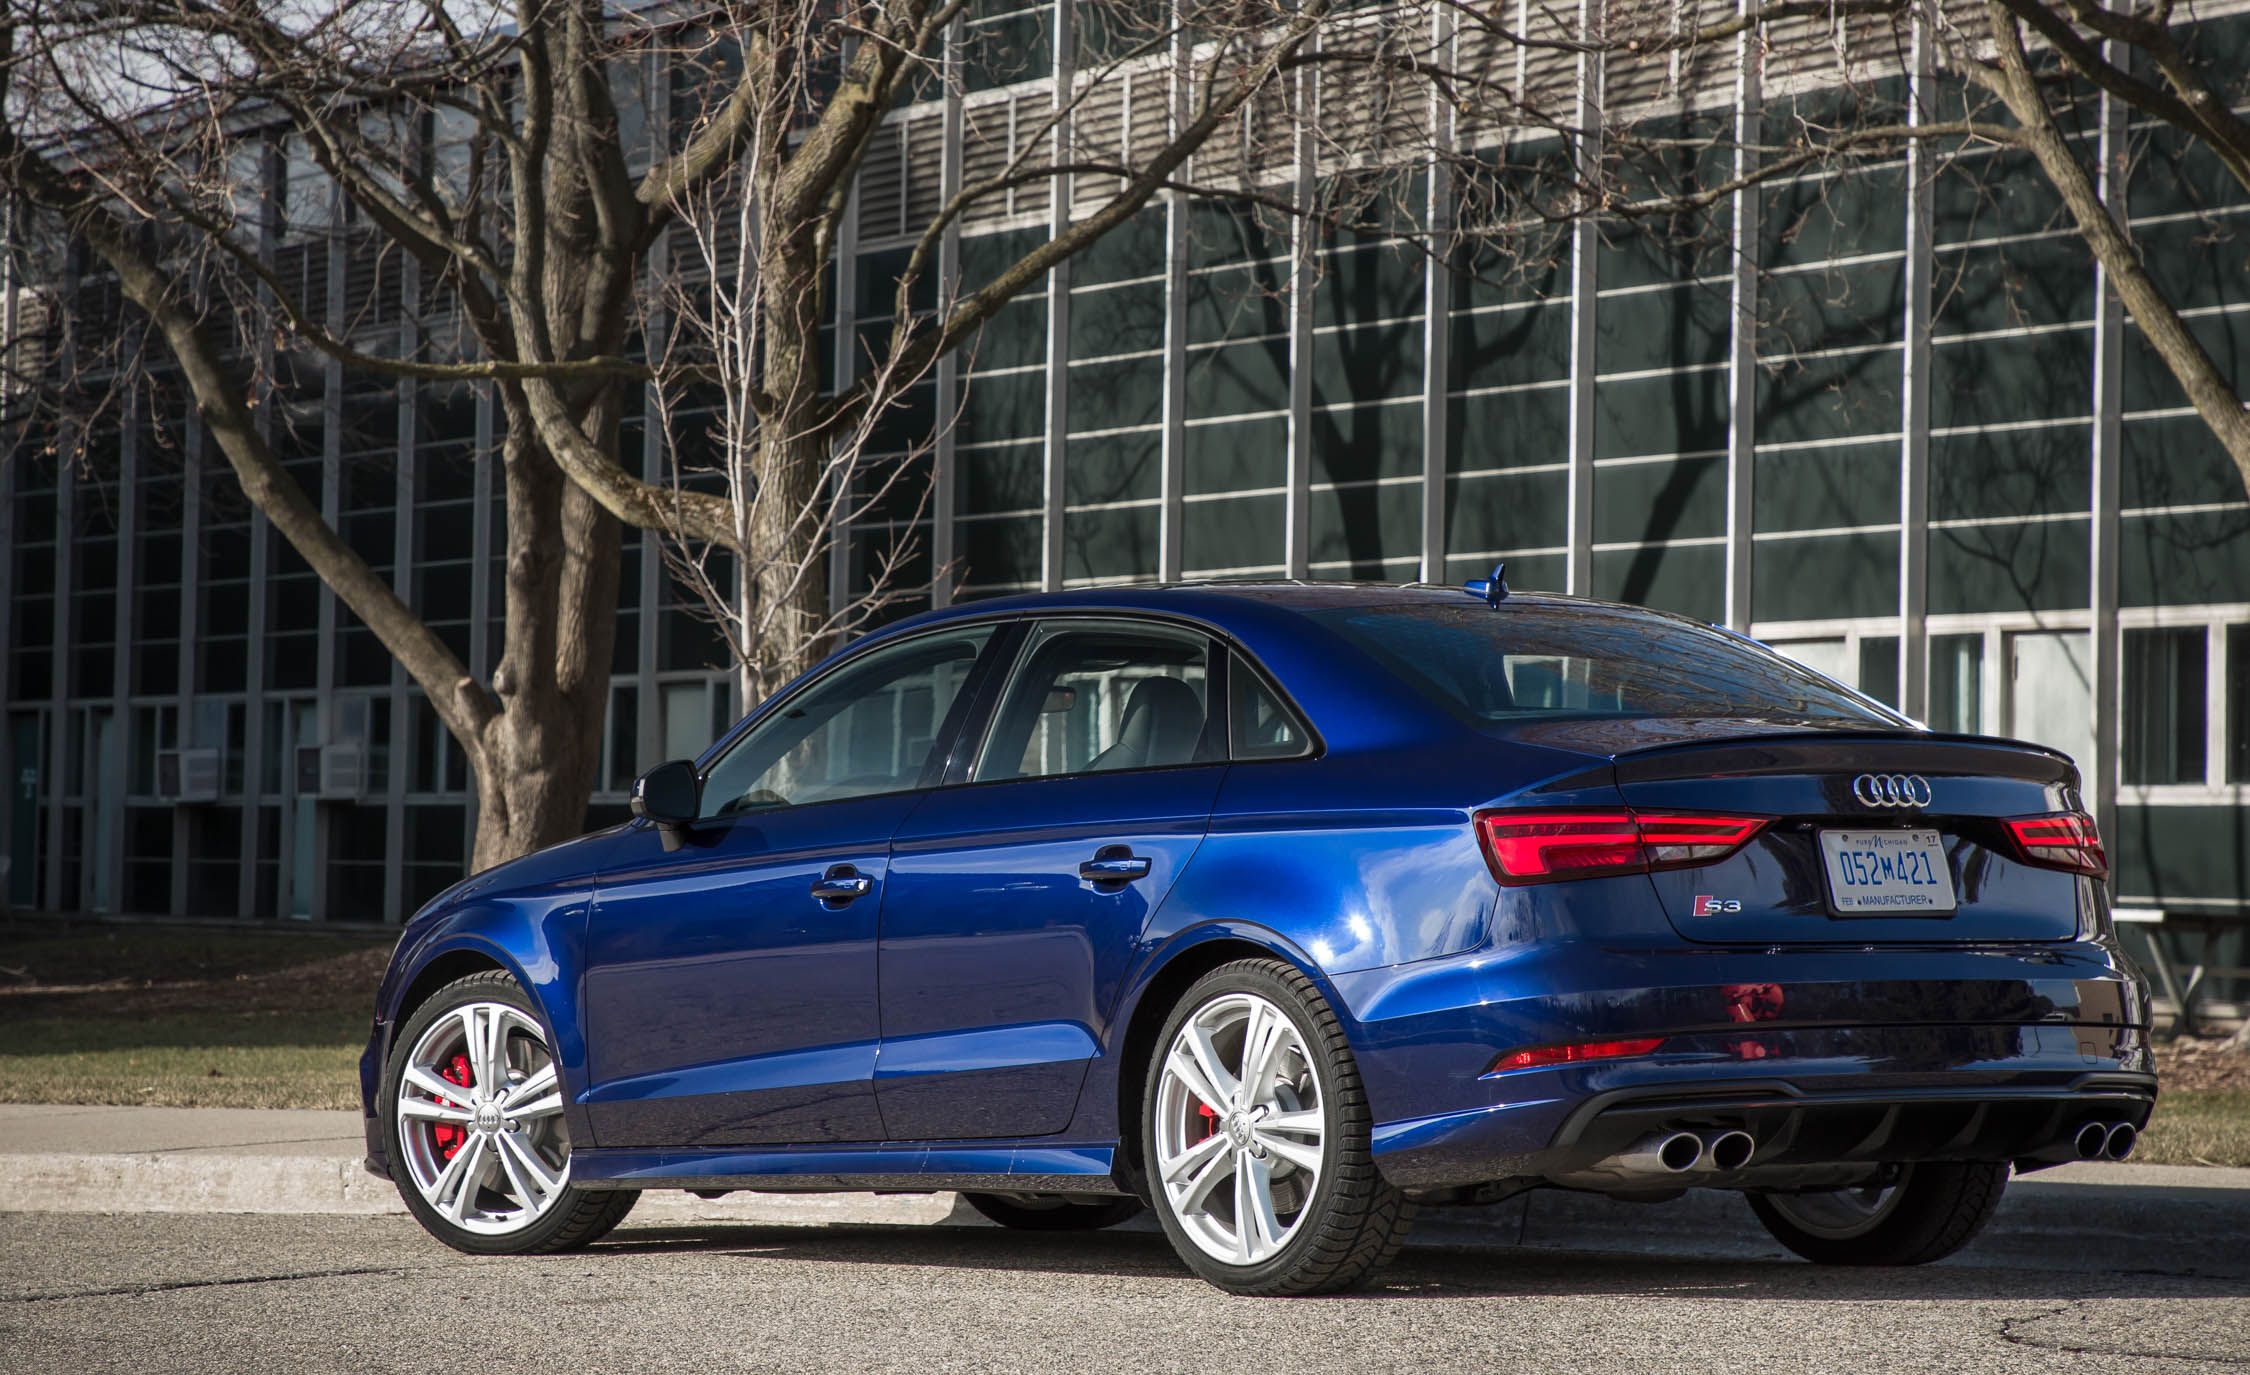 2017 Audi S3 Exterior Side And Rear (View 44 of 50)